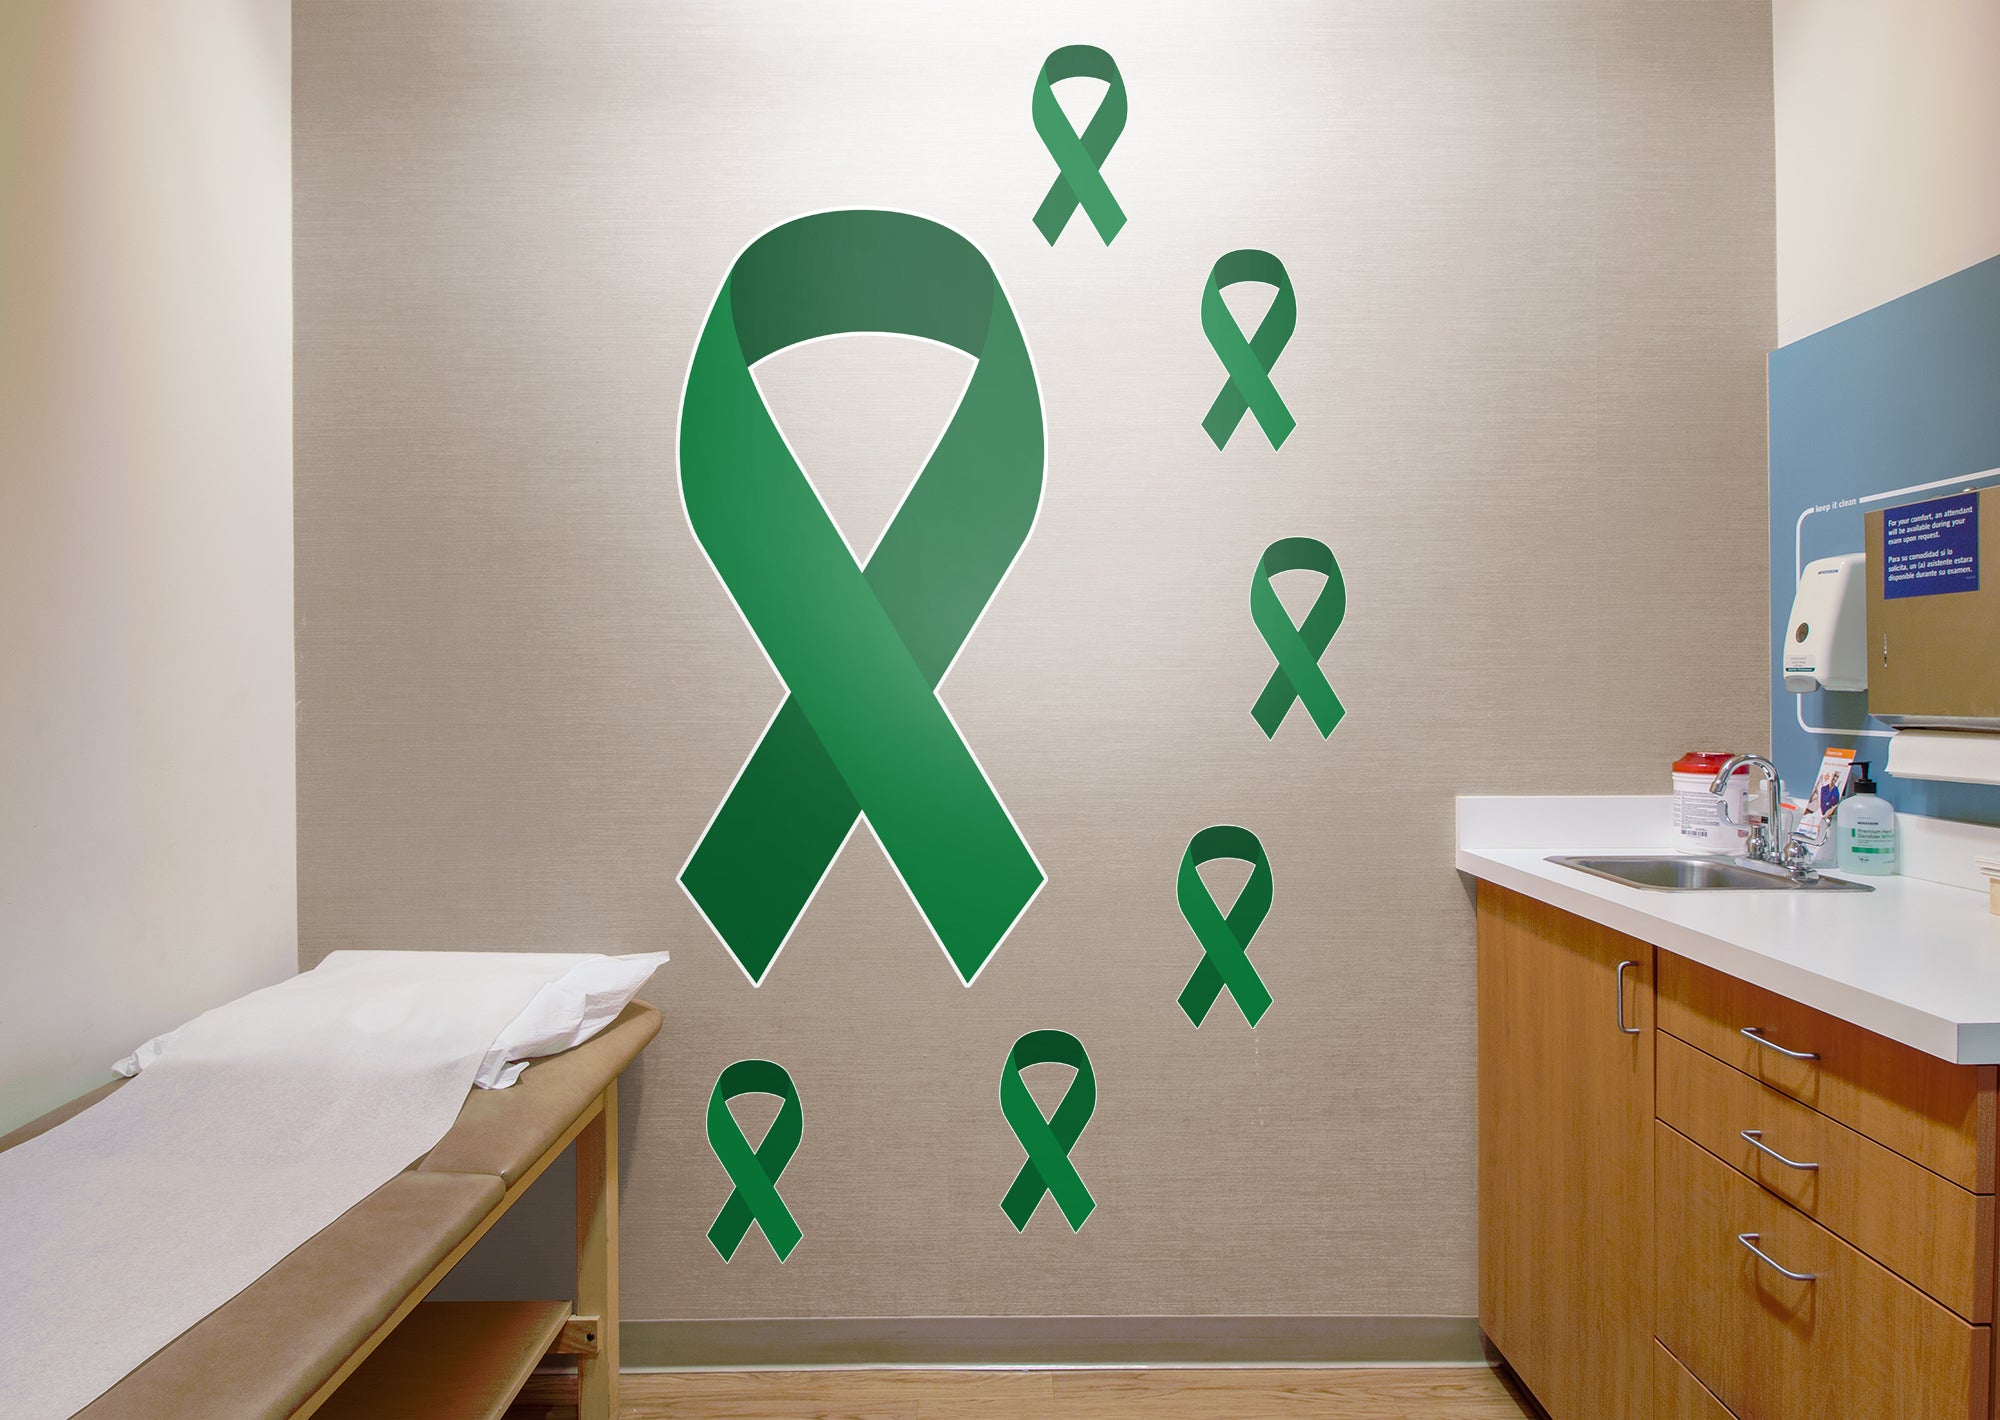 Colors of Cancer Ribbons: American Cancer Society Removable Wall Decal Giant Kidney Cancer Ribbon + 6 Decals (24"W x 51"H) by Fa